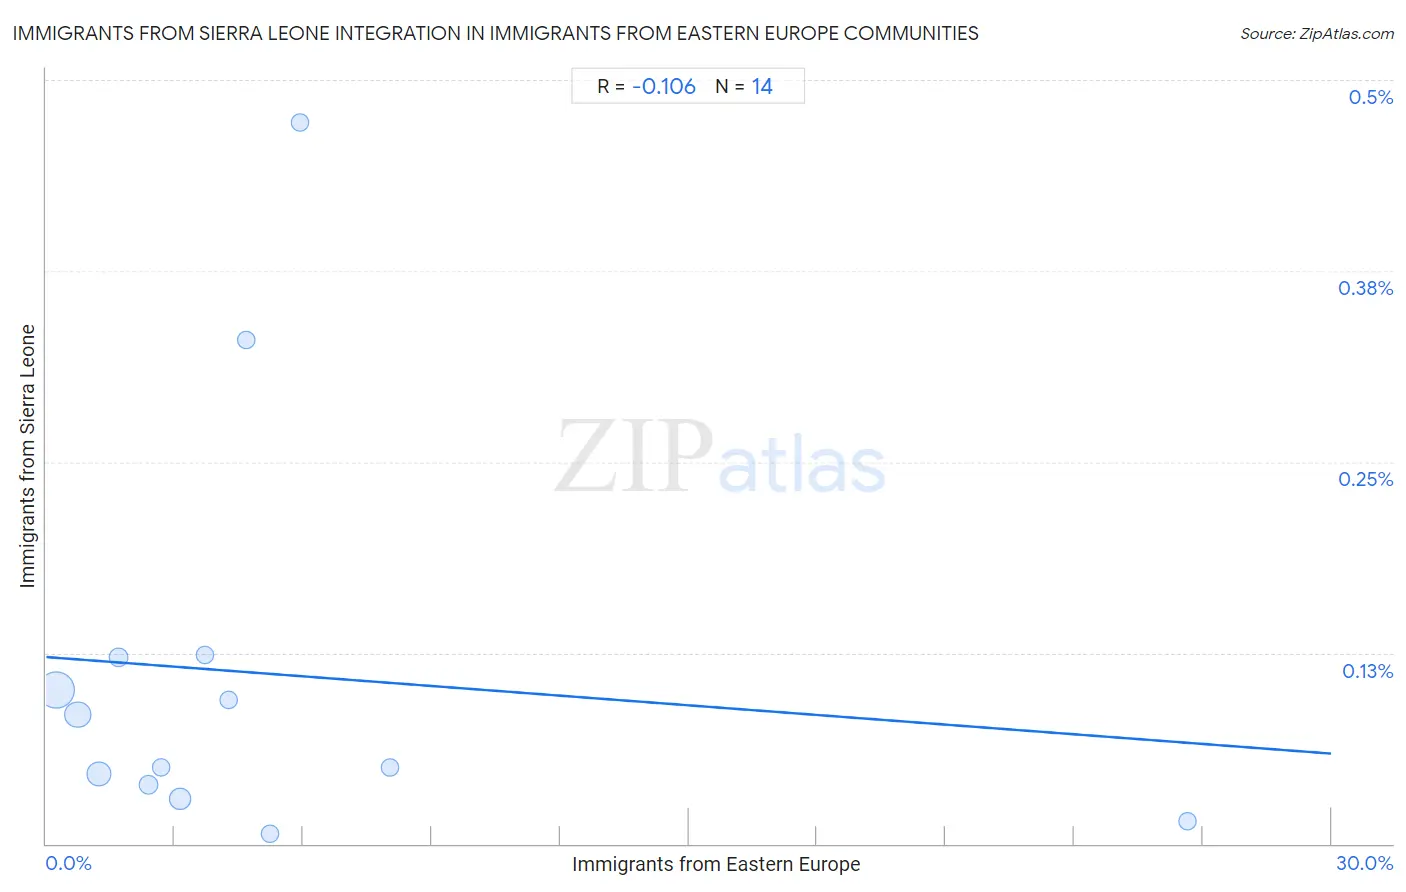 Immigrants from Eastern Europe Integration in Immigrants from Sierra Leone Communities